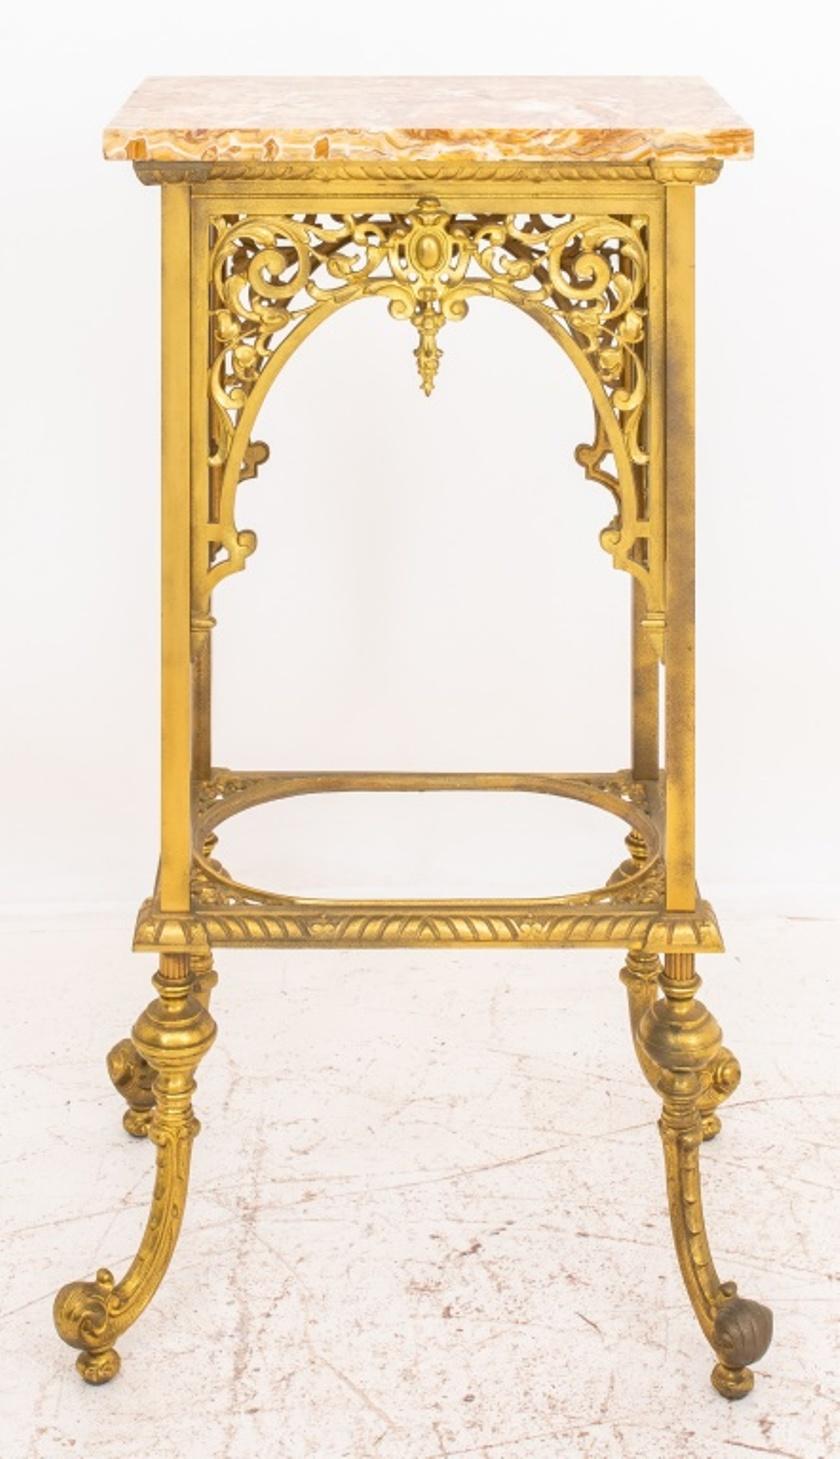 Renaissance revival marble topped brass side table or plant stand, 19/20th C., rectangular with a red onyx top, the sides with reticulated scrollwork and four splayed legs joined by a pierced entretoise with an area for a bowl or glass or marble